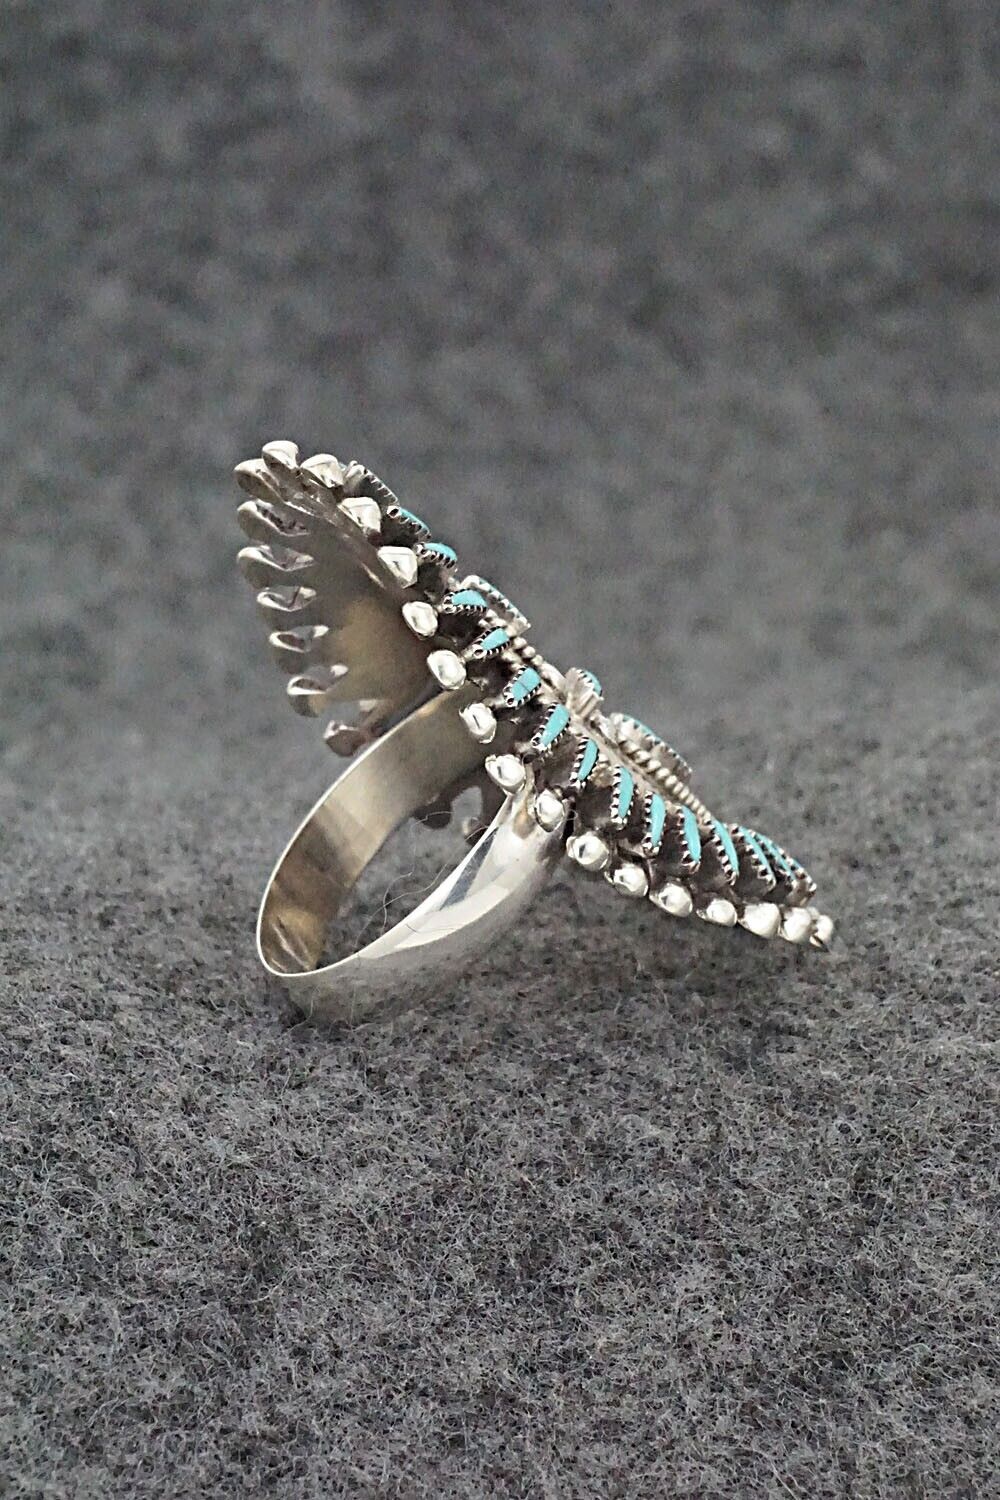 Turquoise & Sterling Silver Ring - Vincent Johnson - Size 8.5